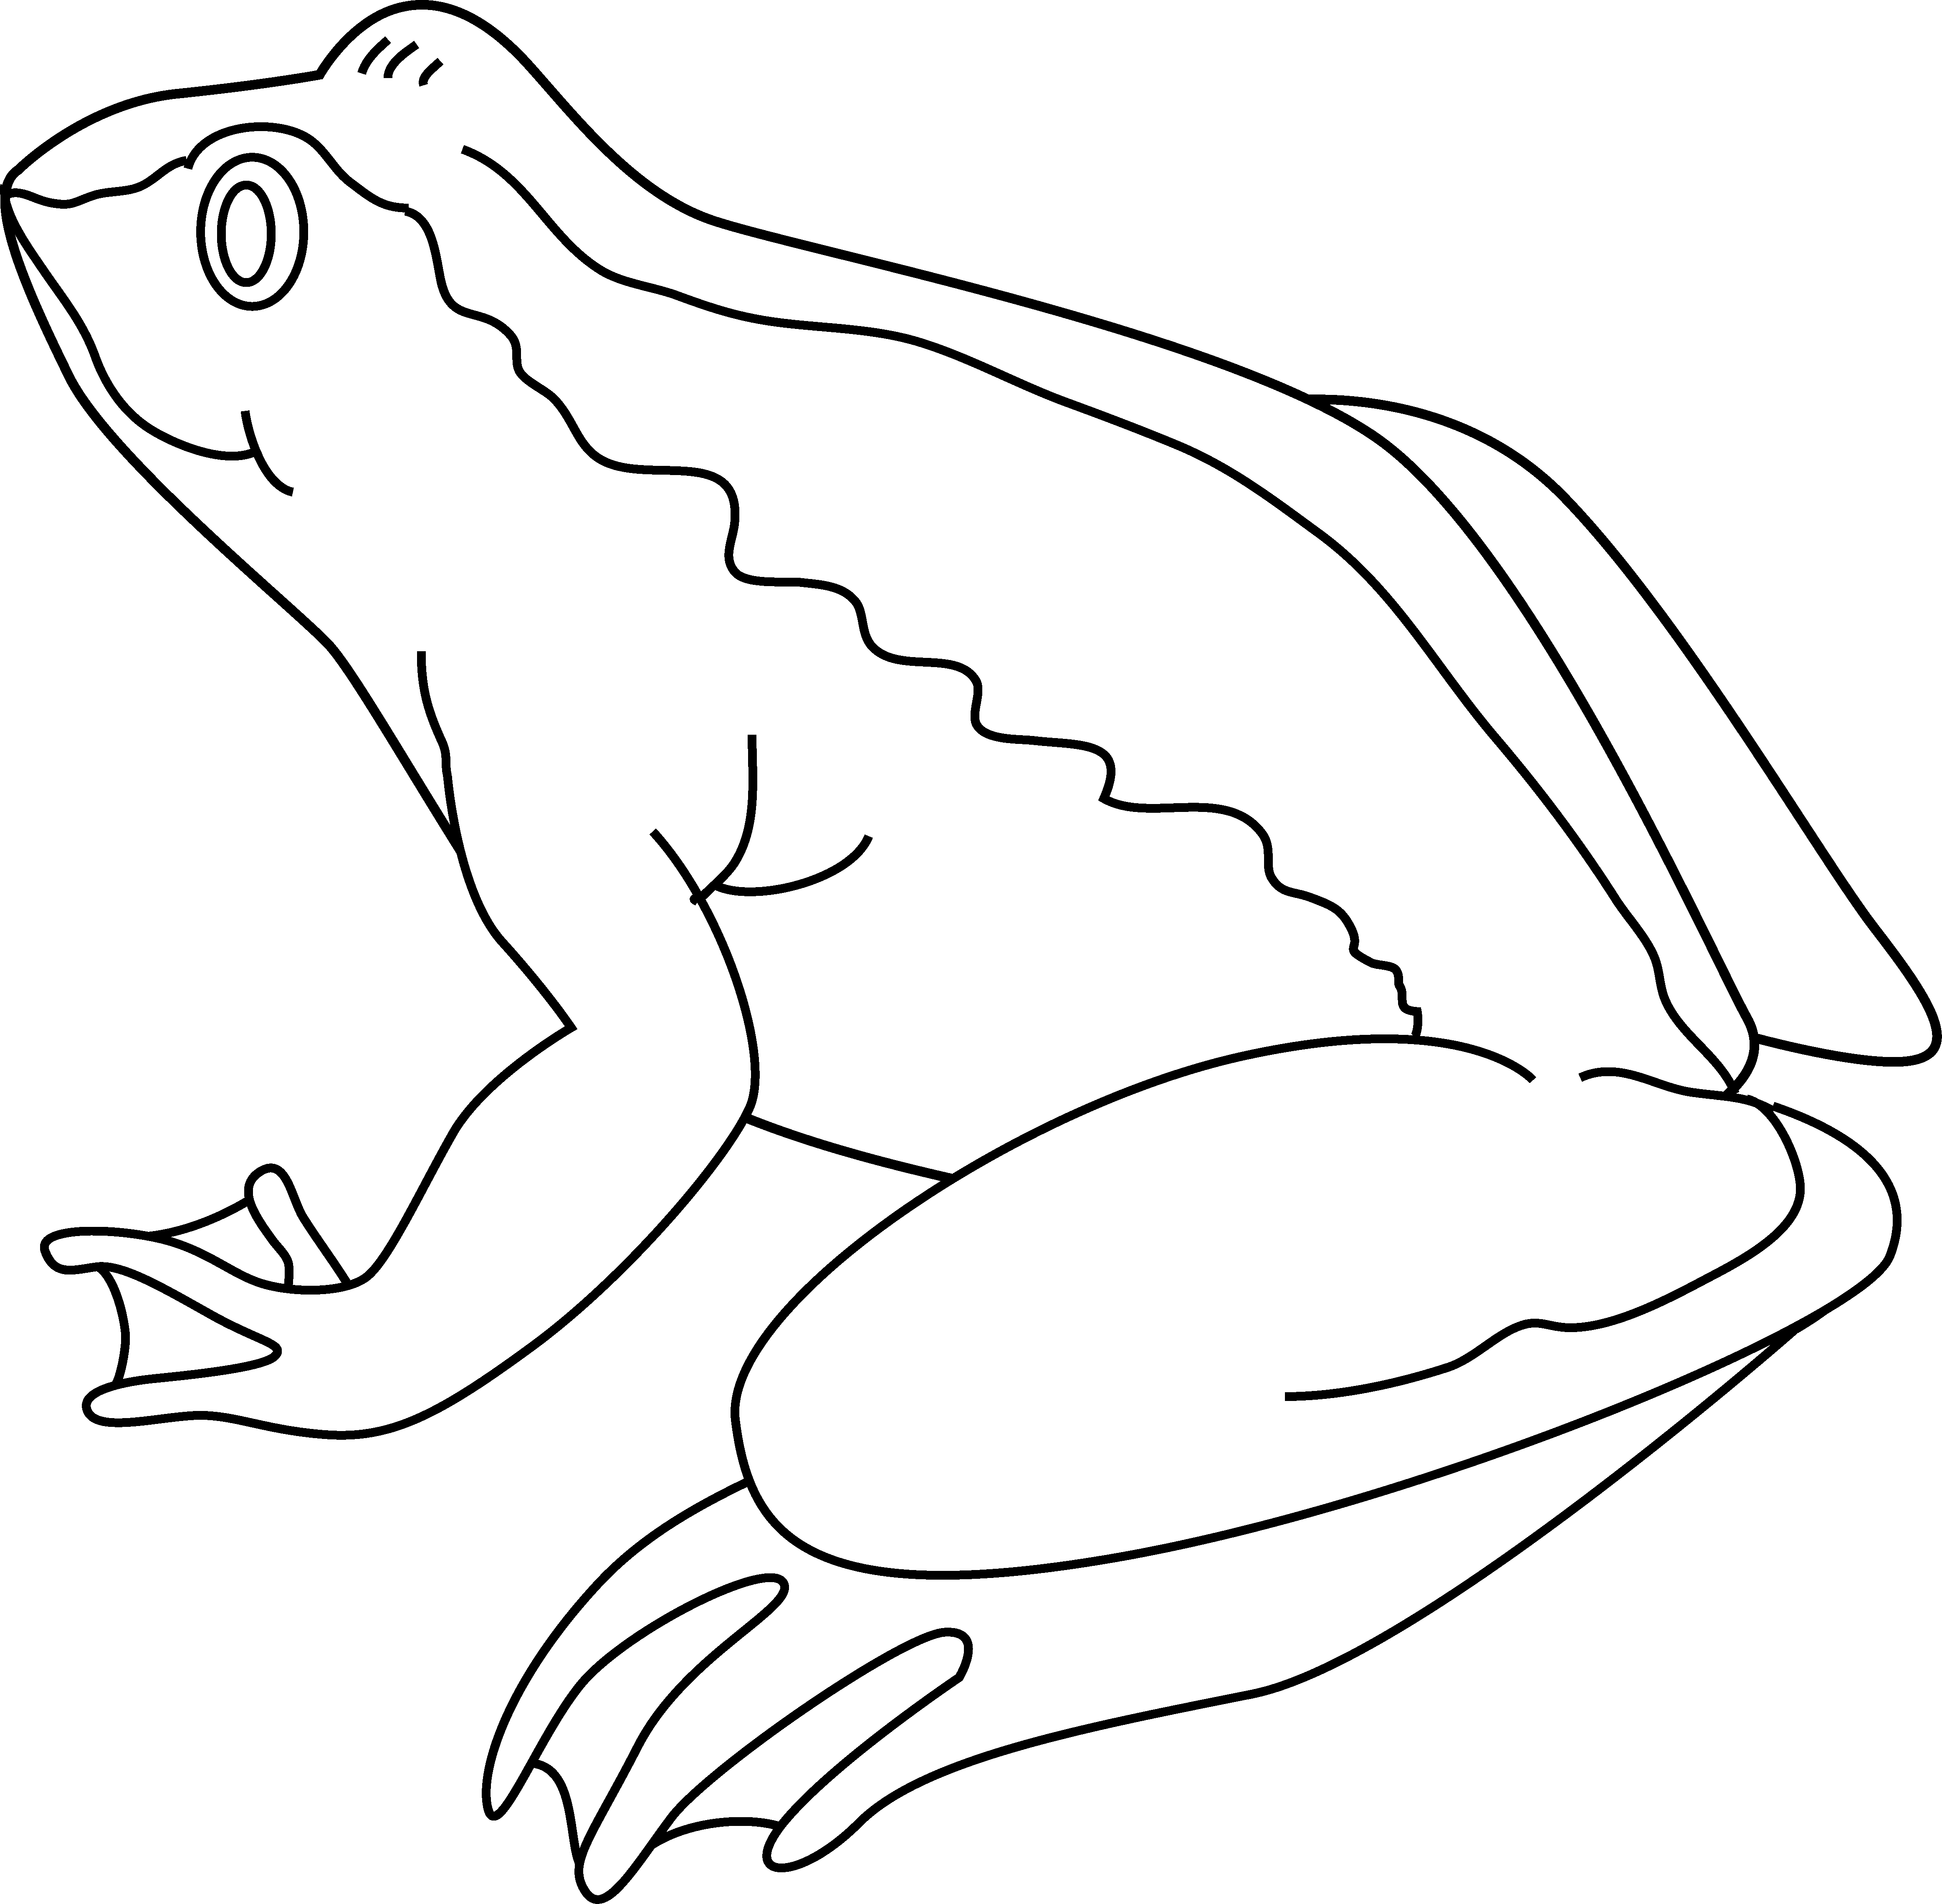 Frog Coloring Page - Free Clip Art